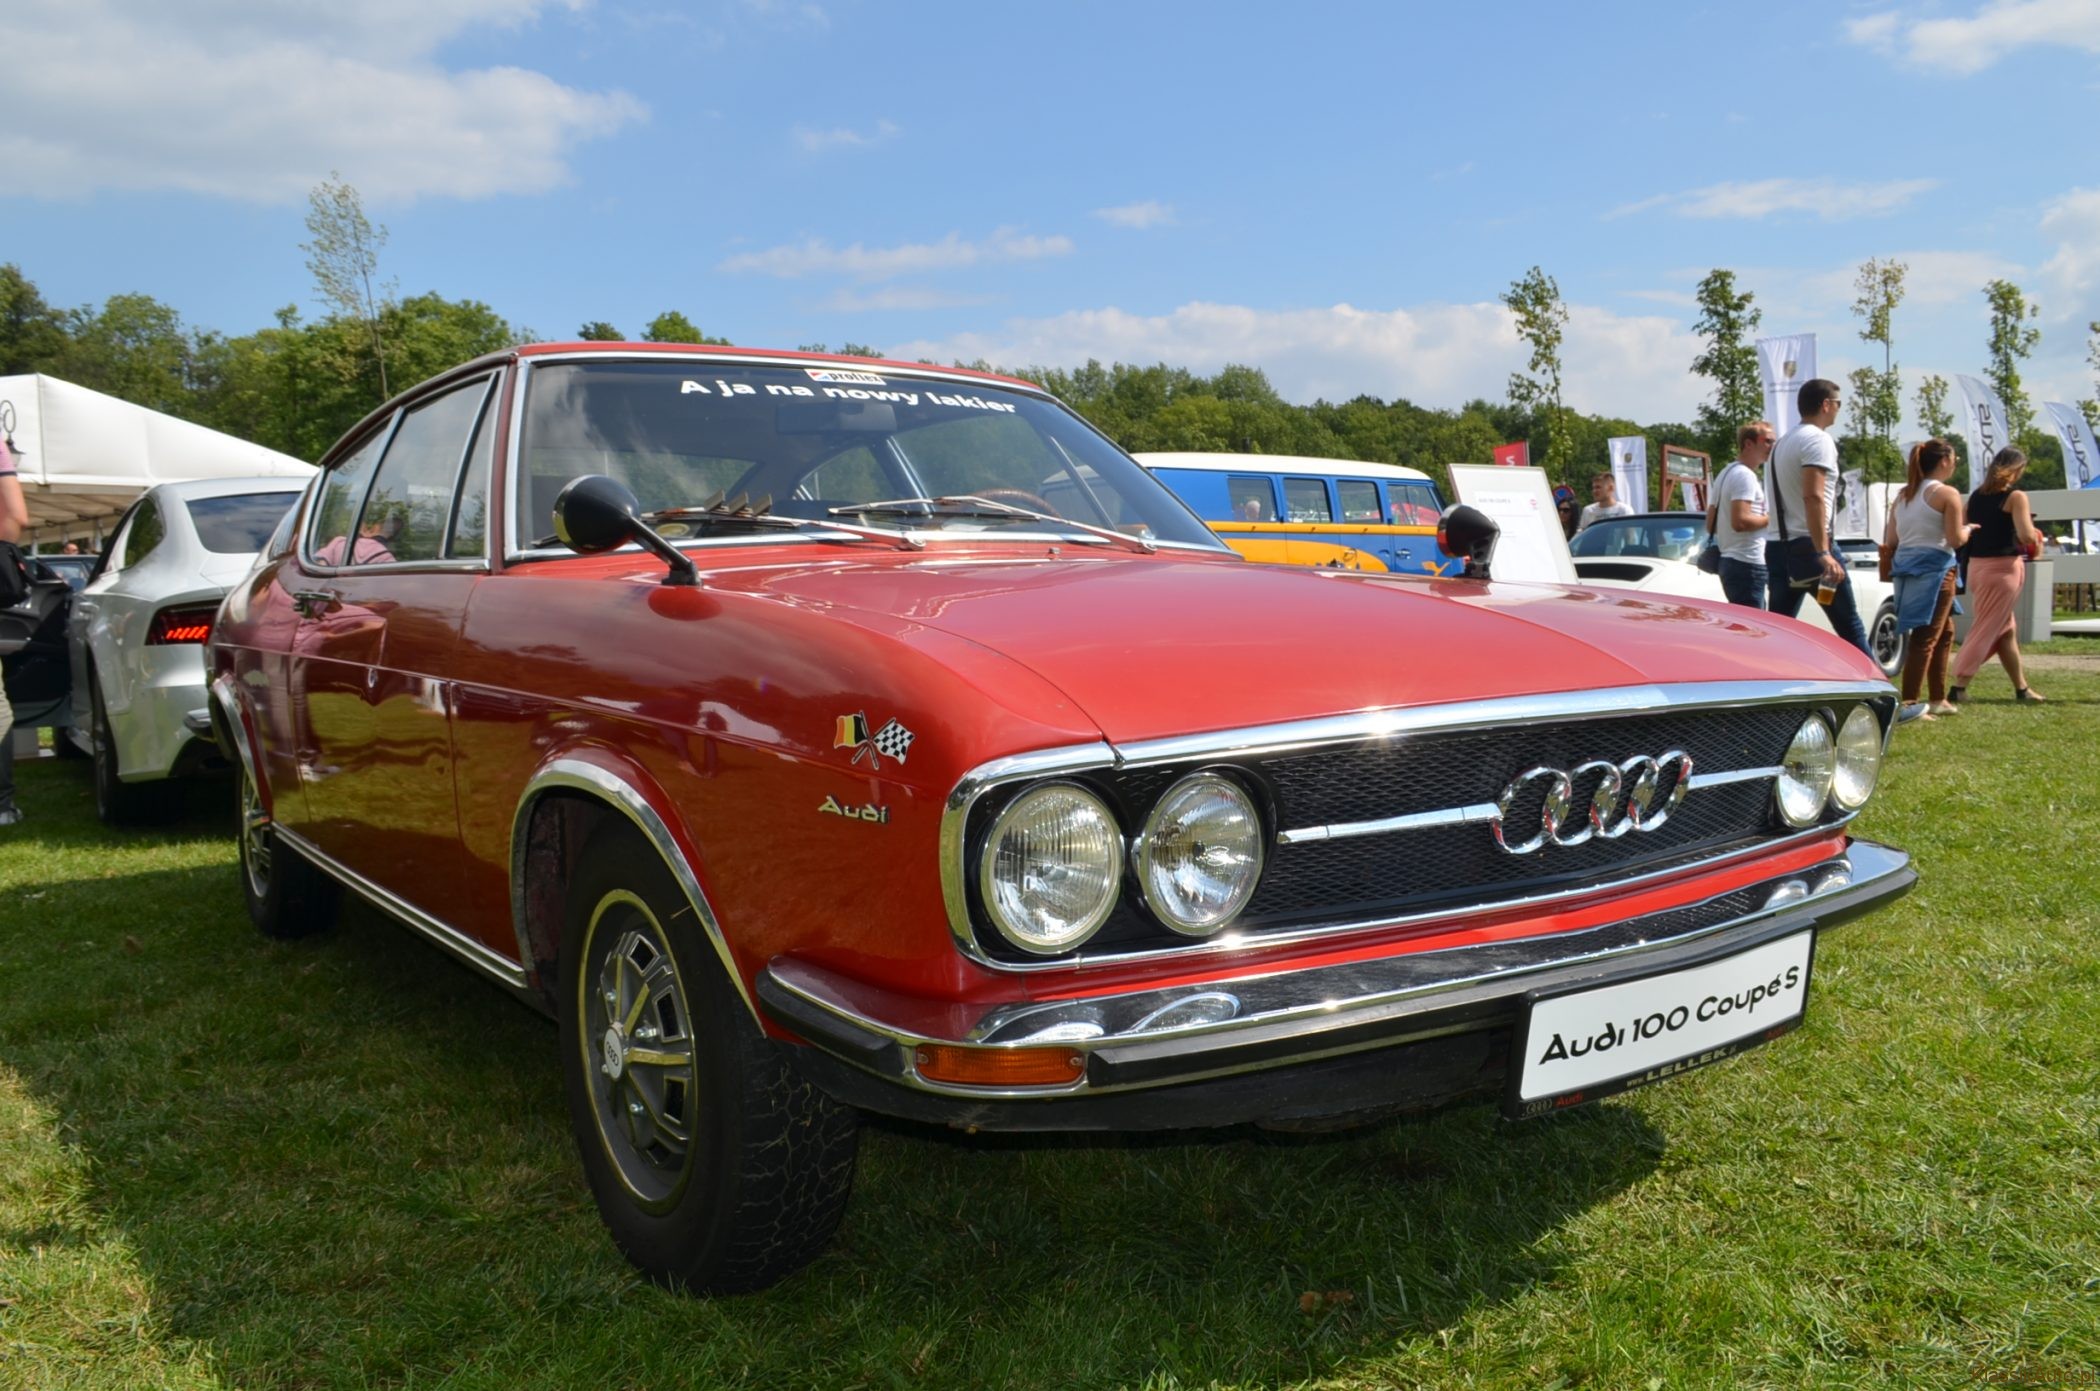 Audi 100 Coupe S and Fiat Dino Coupe